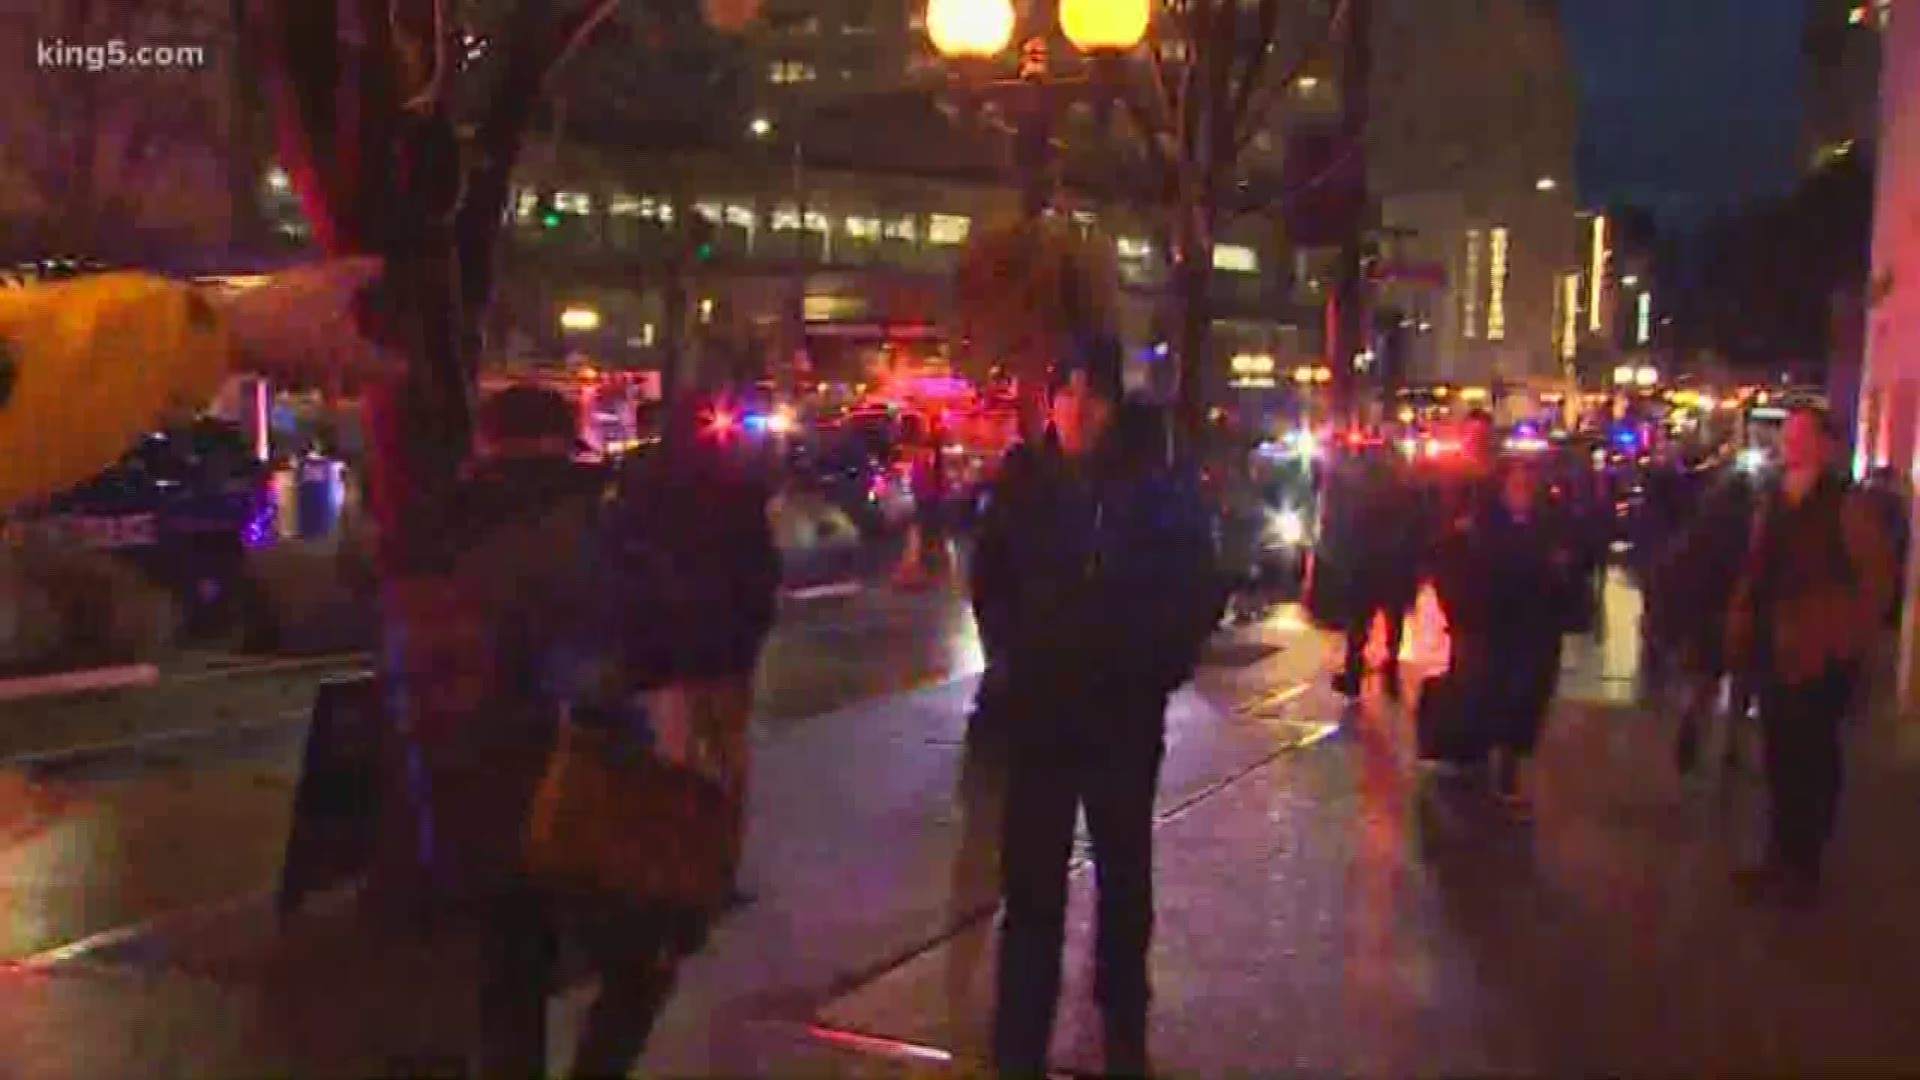 This is the second shooting in downtown Seattle within a few hours. There may be multiple victims.